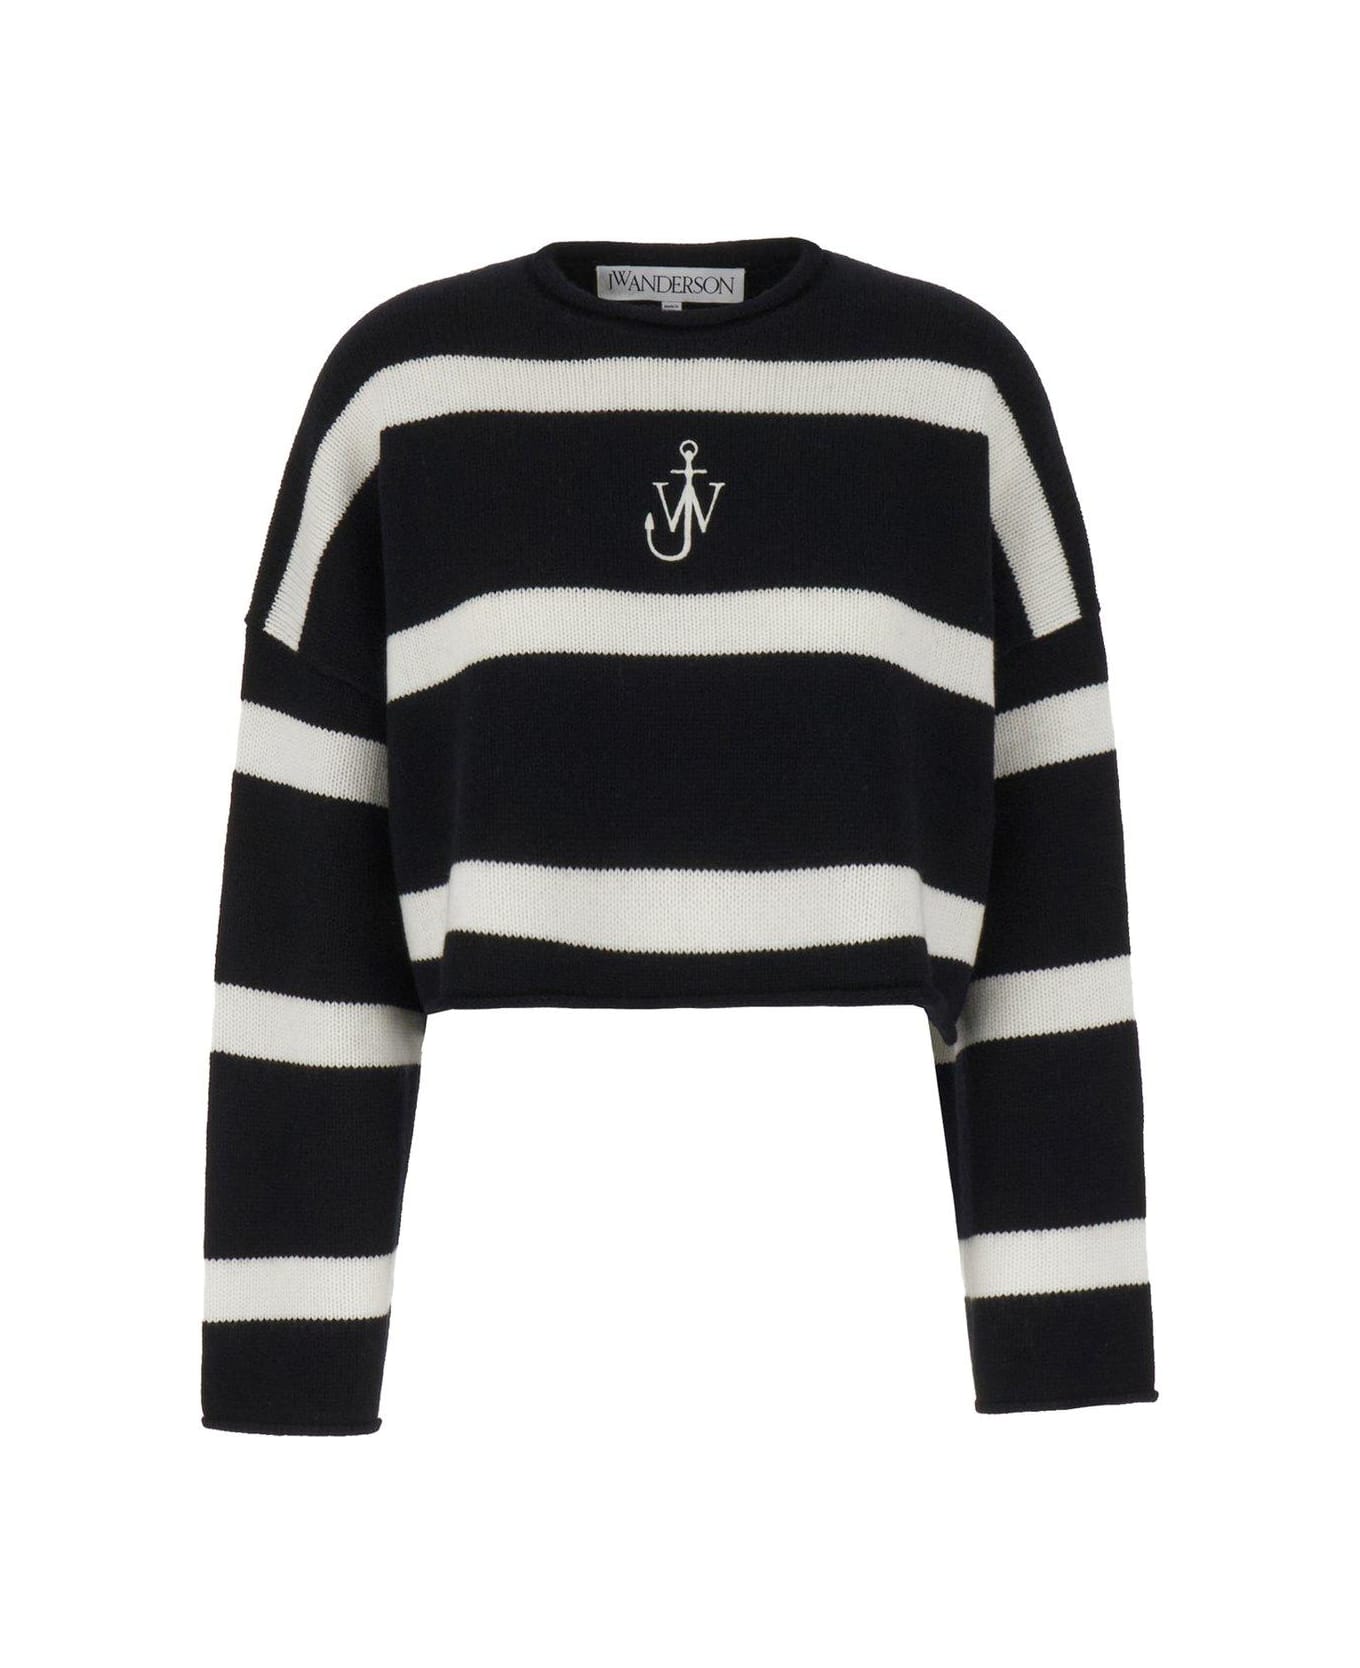 J.W. Anderson Anchor Logo Embroidered Cropped Jumper